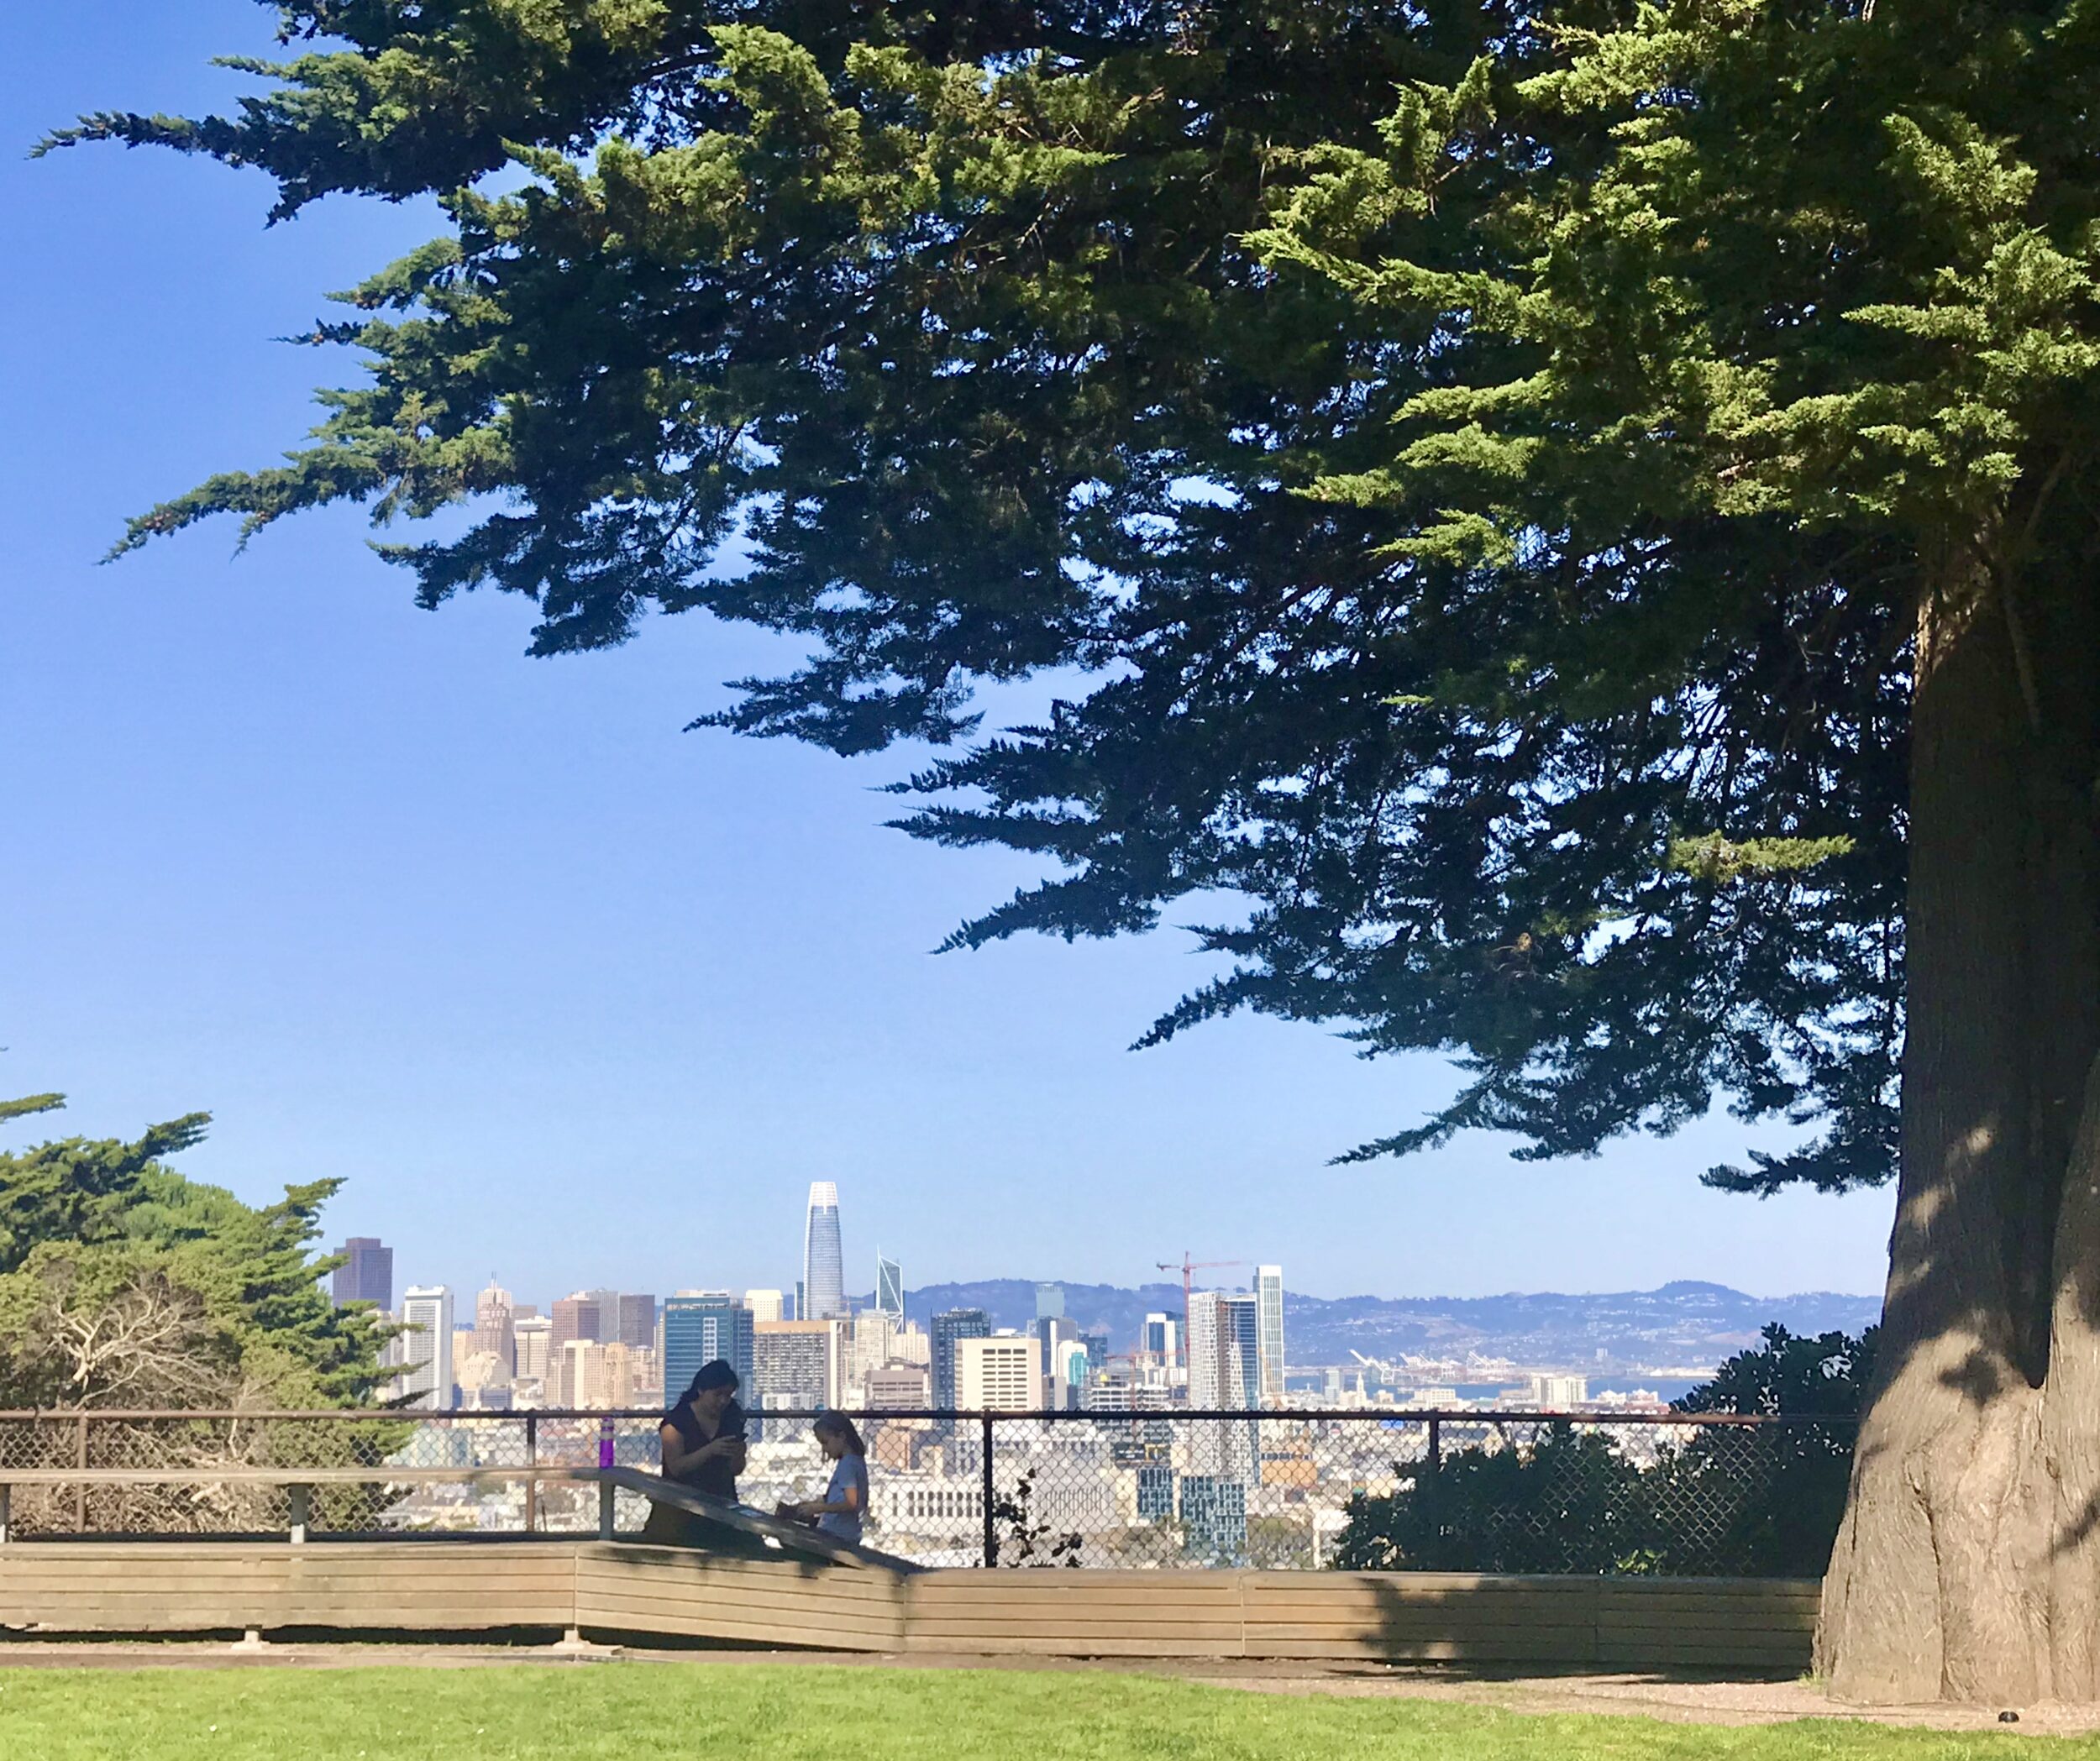 A woman and a little girl are sitting on a bench against a backdrop of the San Francisco skyline near a large tree.